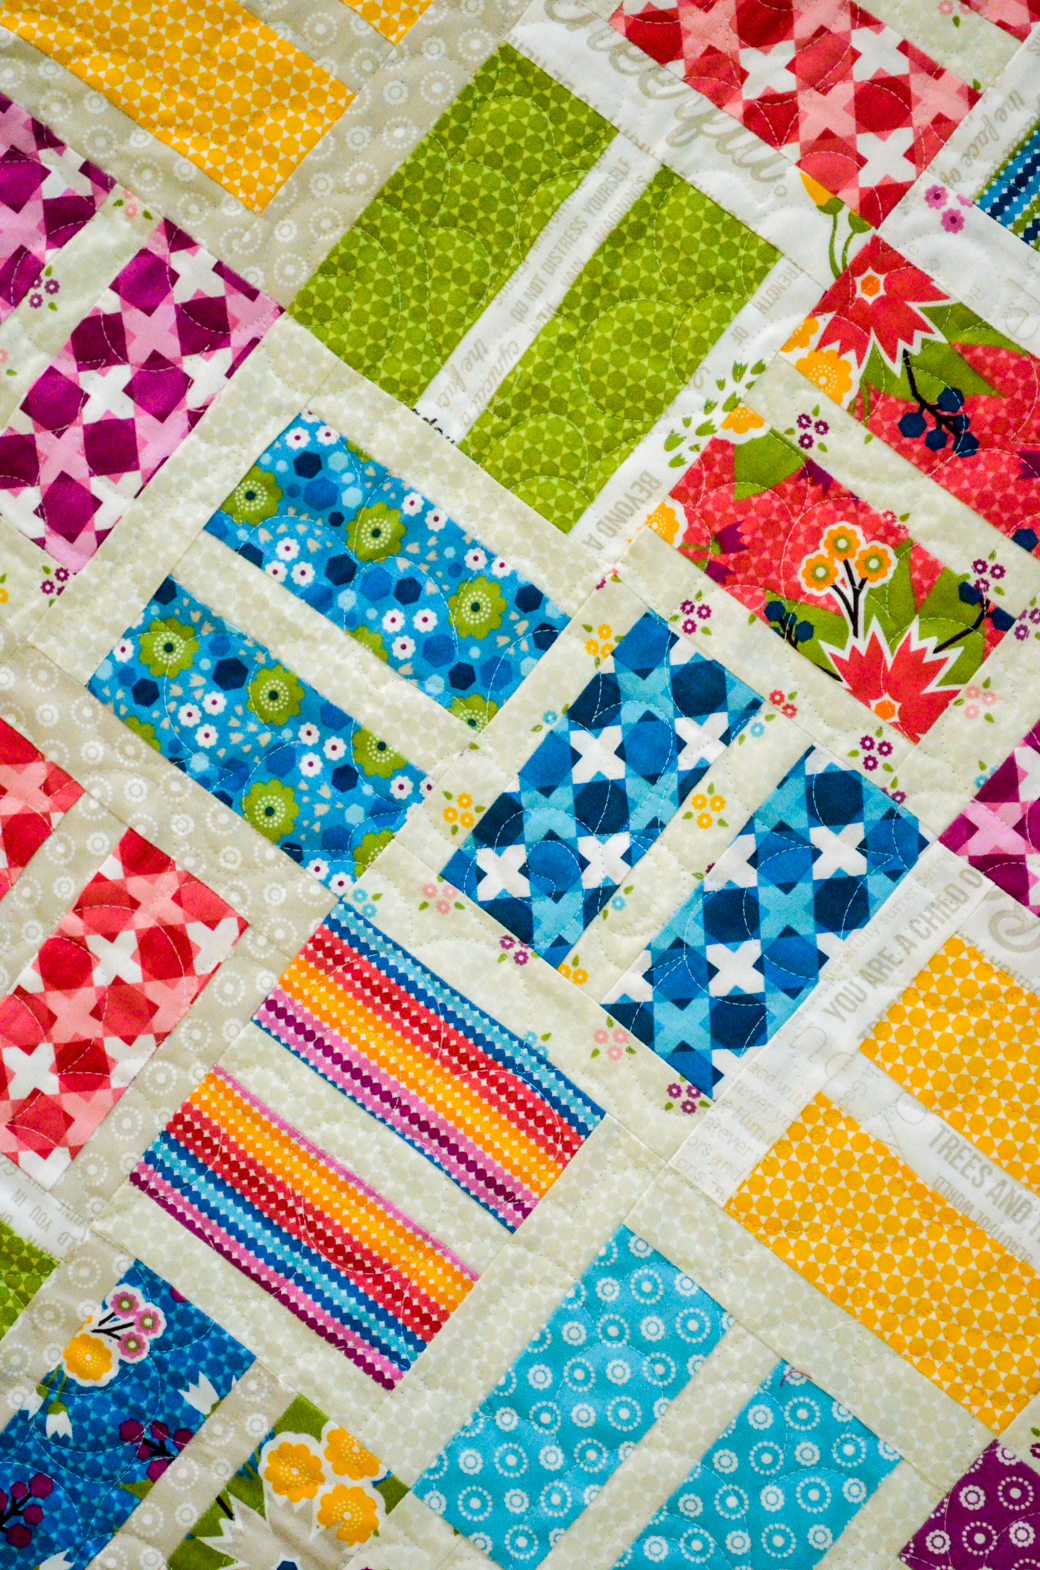 Building Blocks quilt pattern by April Rosenthal for Prairie Grass Patterns